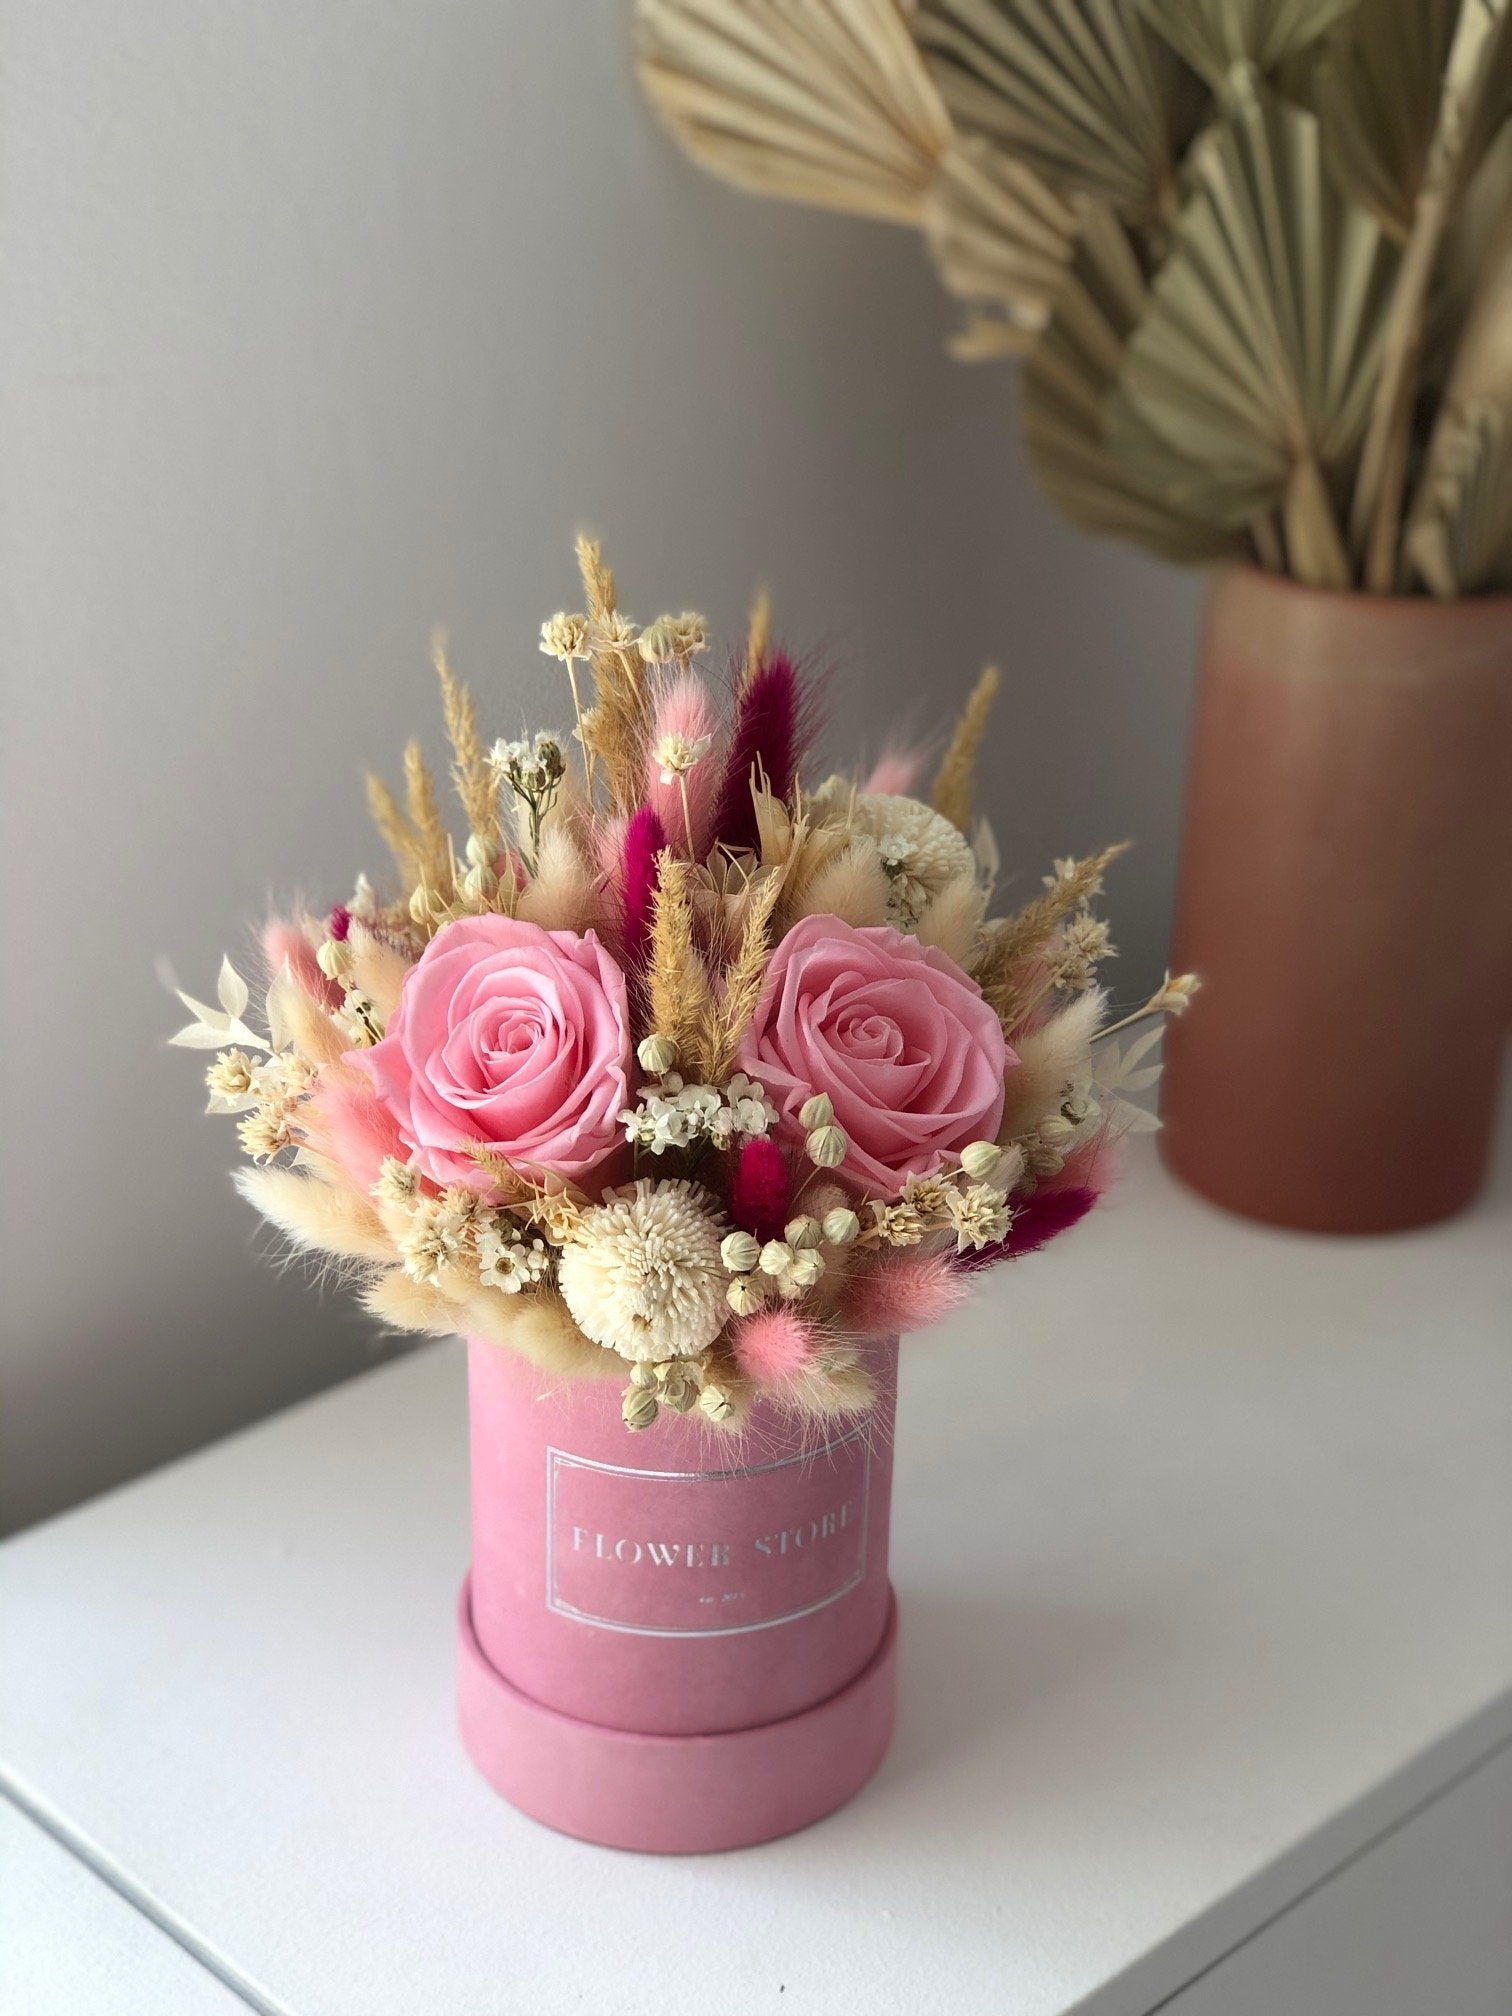 Small dried flowerbox with 3 pink eternal roses